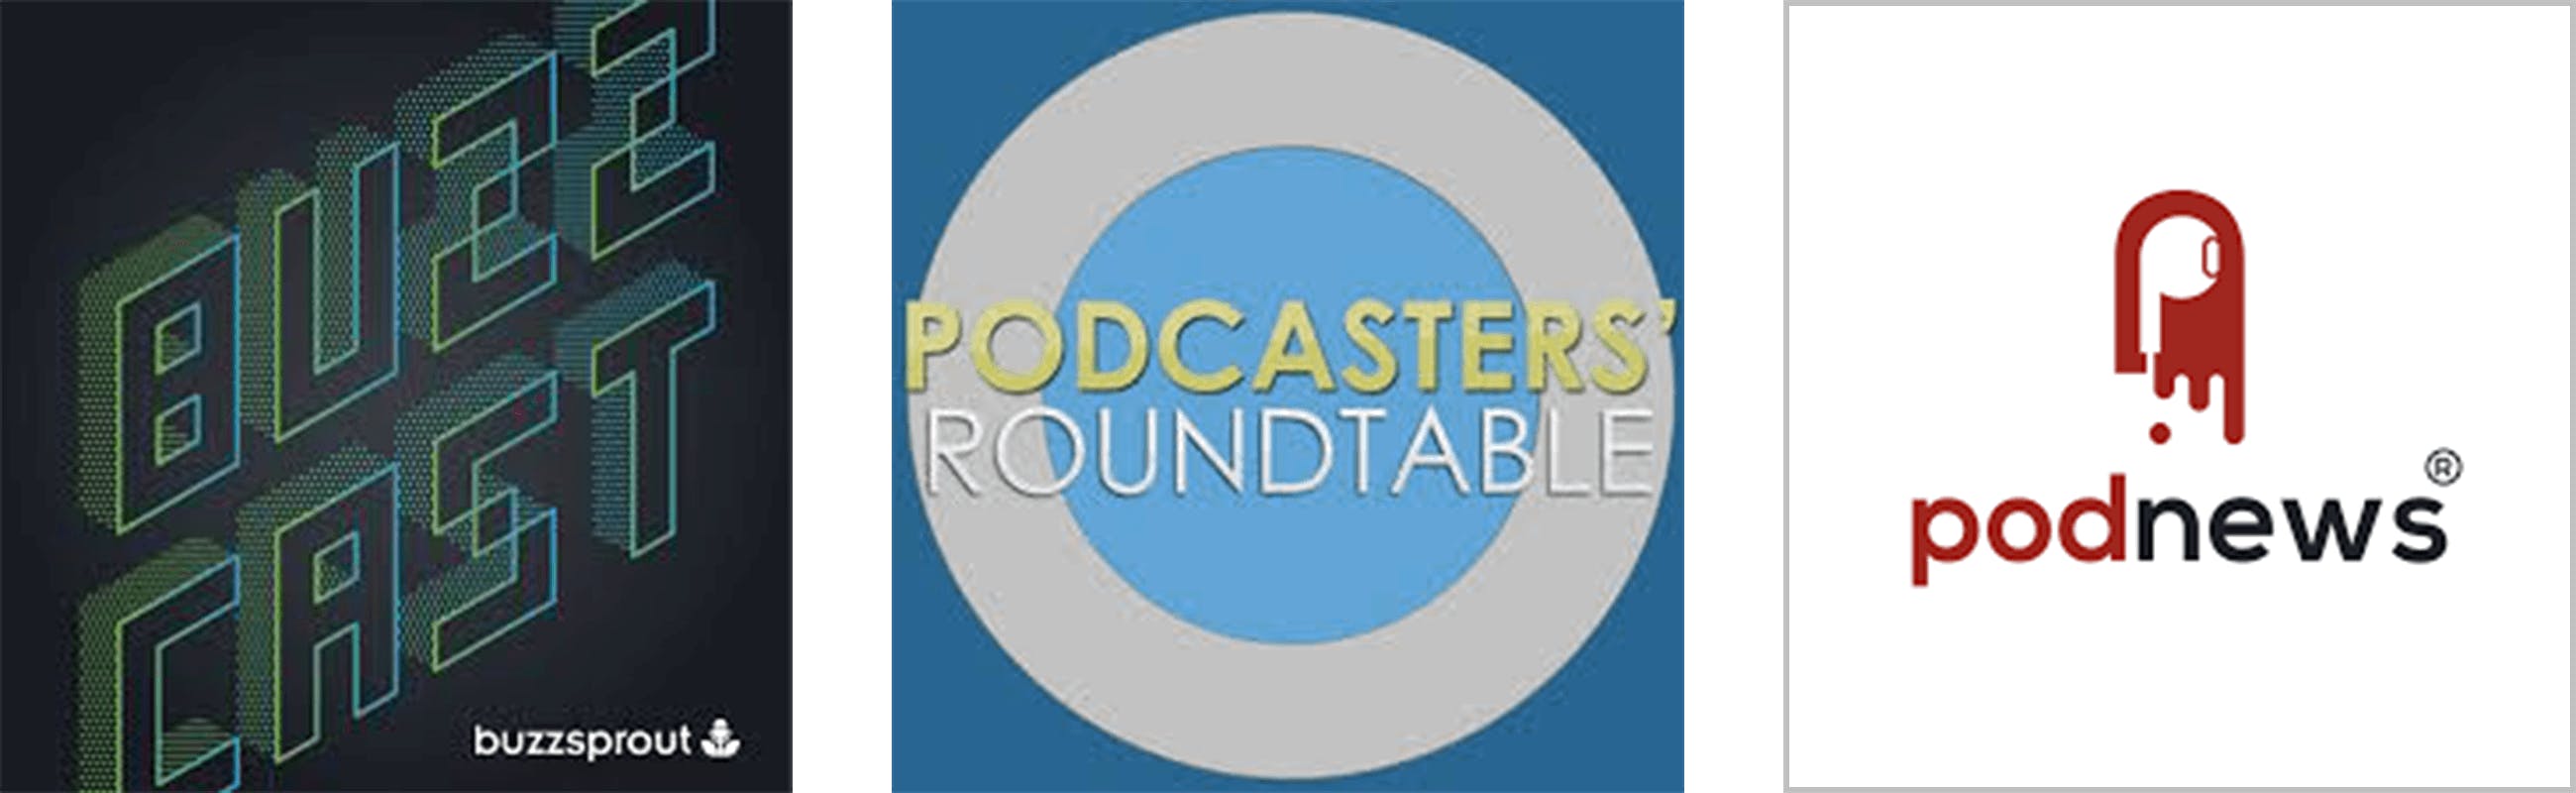 Podcasts about the podcasting industry